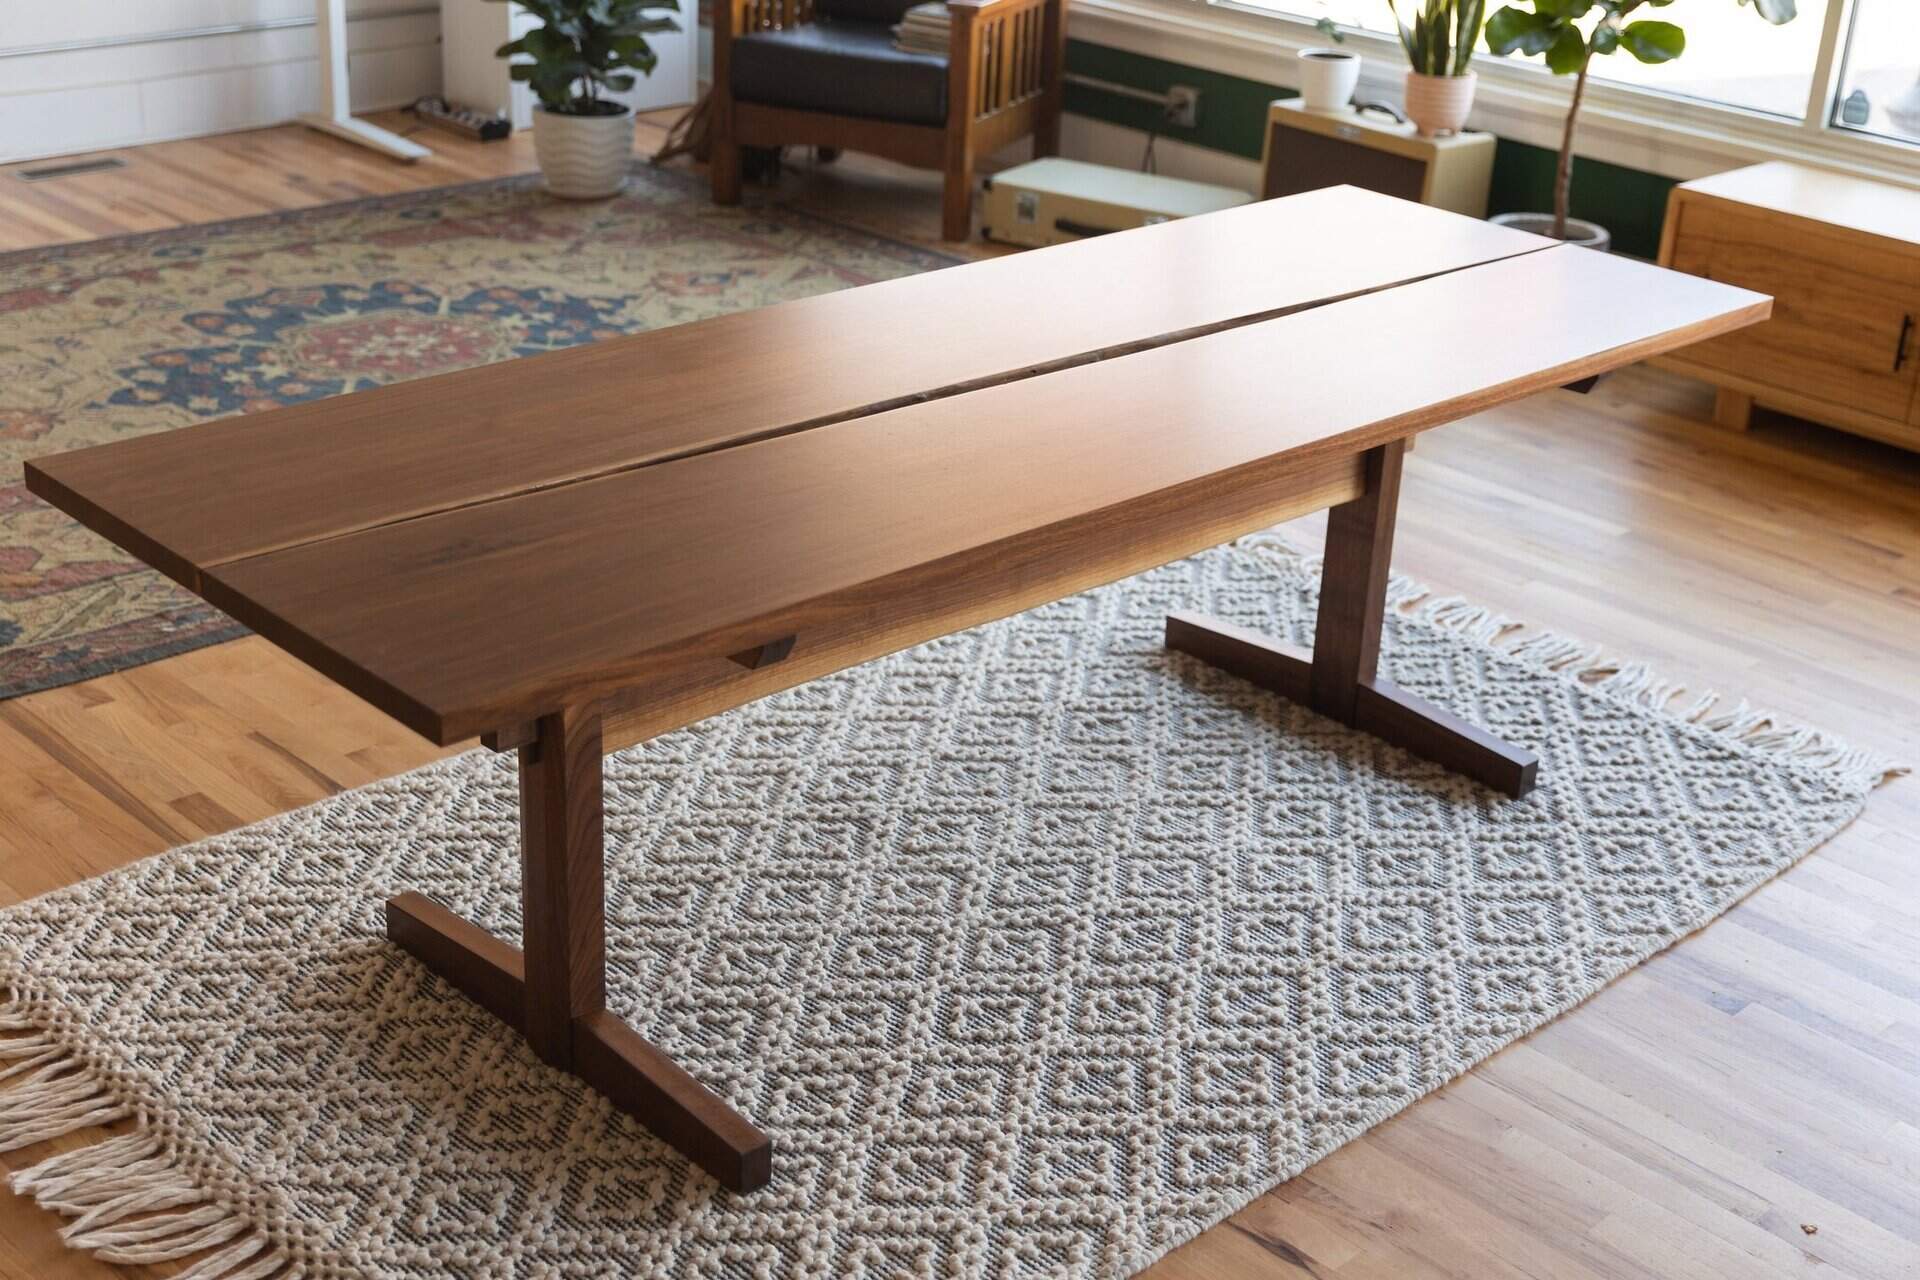 What Style Is A Trestle Table?